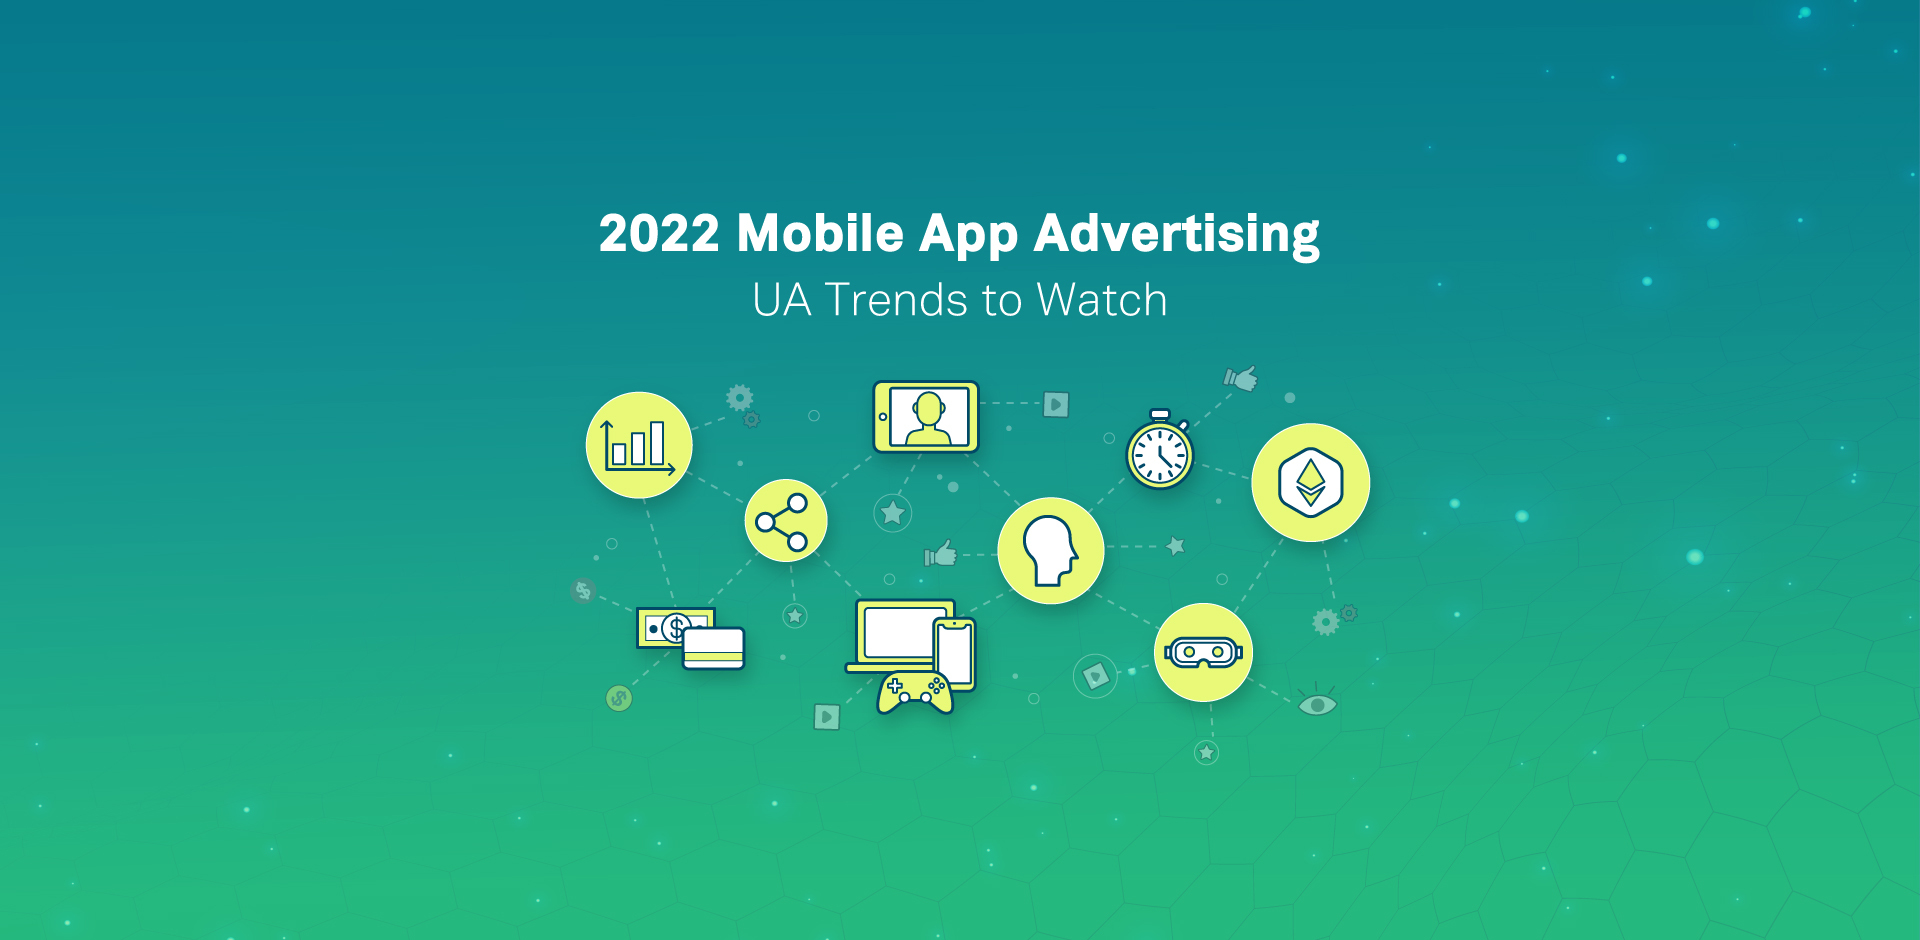 2022 Mobile App Advertising Trends to Watch